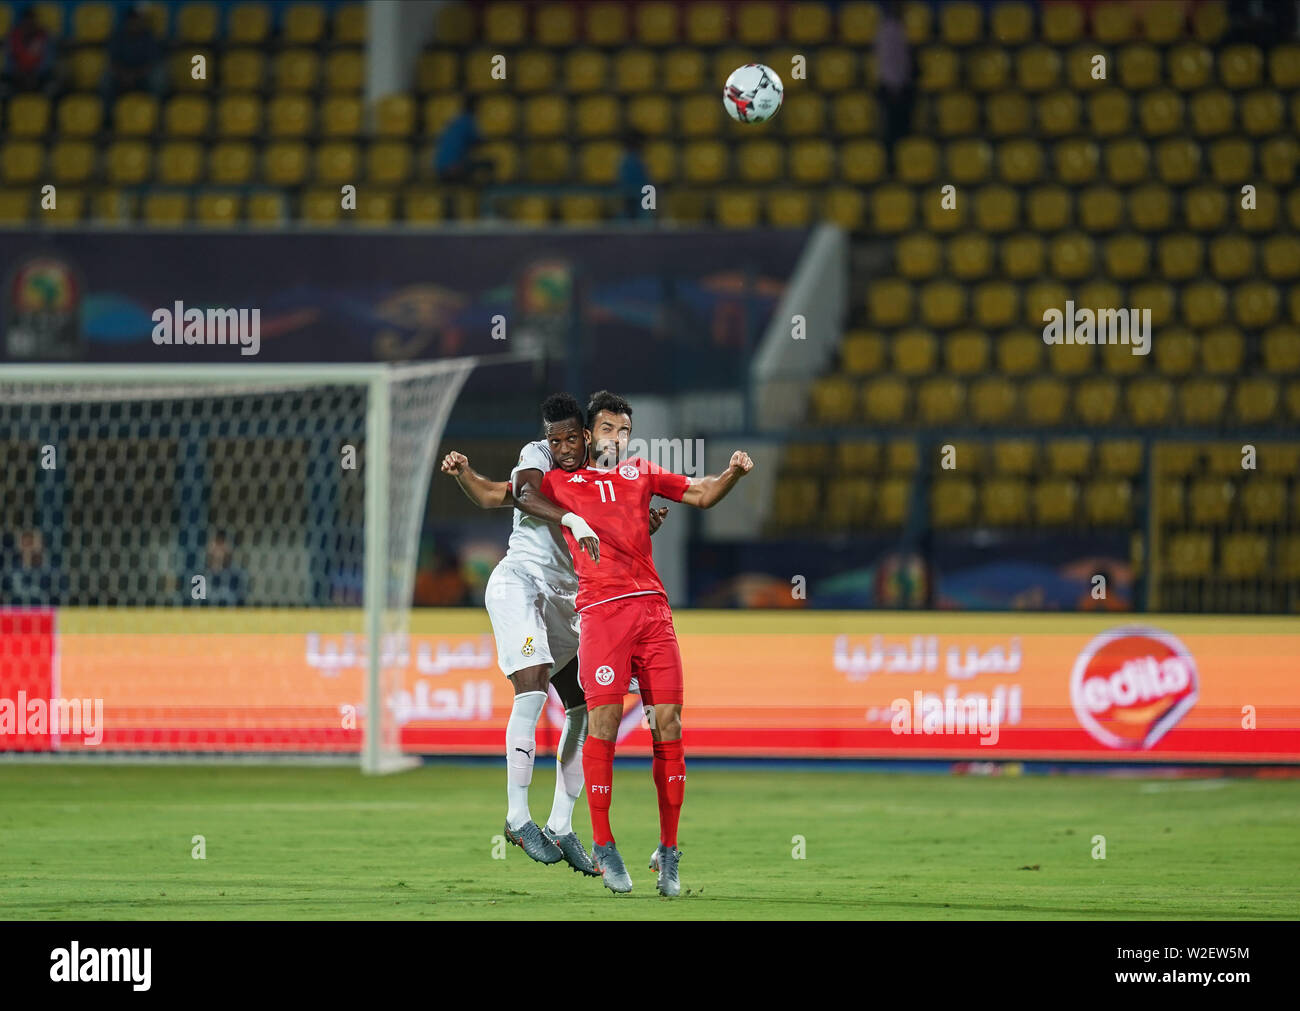 FRANCE OUT July 8, 2019: Jonathan Mensah of Ghana and Taha Yassine Khnissi of Tunisia challenging for the ball during the 2019 African Cup of Nations match between Ghana and Tunisia at the Ismailia Stadium in Ismailia, Egypt. Ulrik Pedersen/CSM. Stock Photo